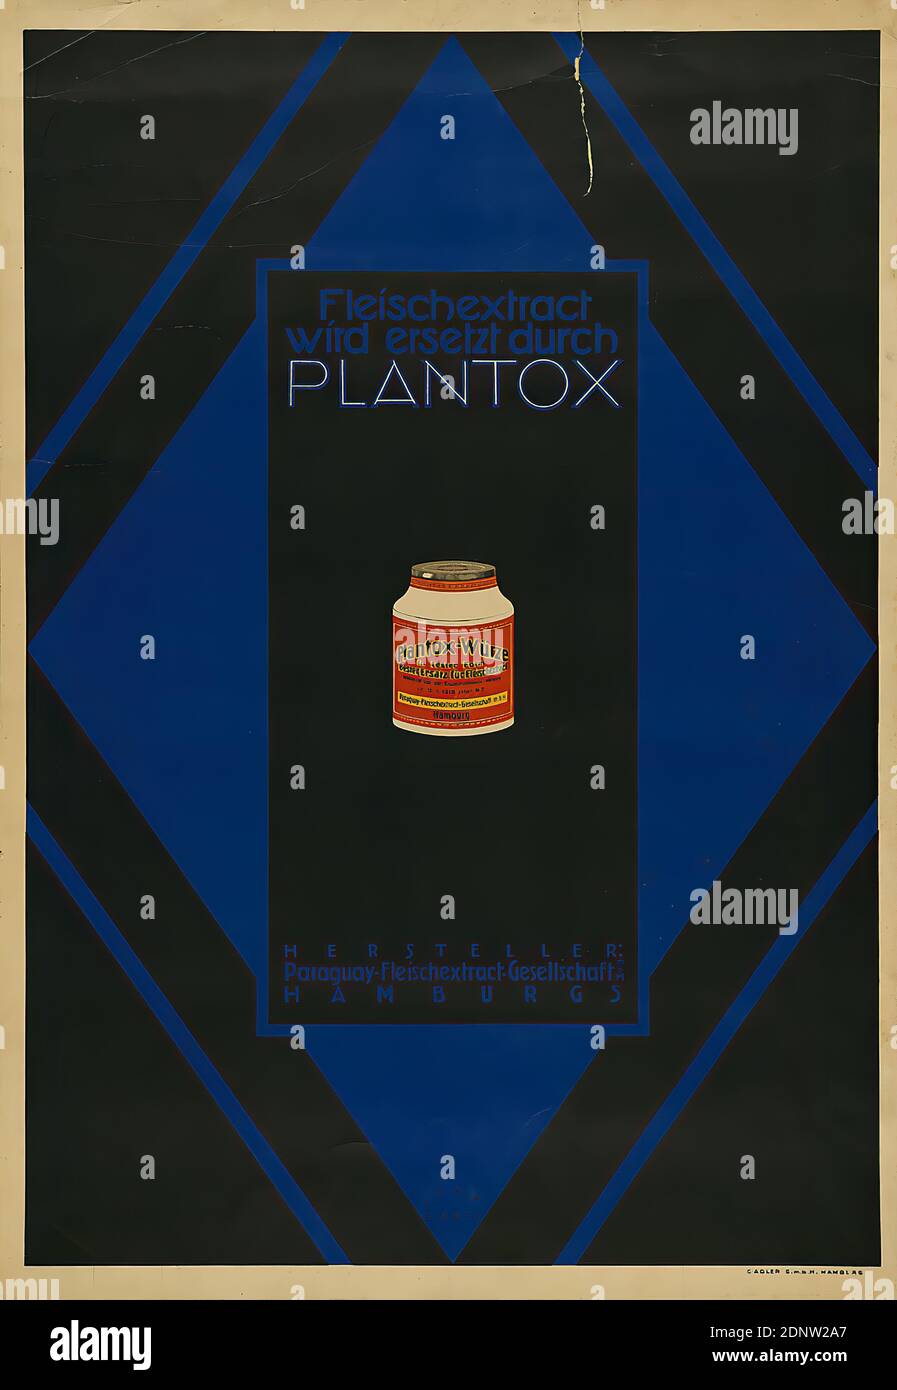 Lithographische Kunstanstalt C. Adler, Jupp Wiertz, Fleischextract is replaced by Plantox, paper, offset lithography, total: height: 73,5 cm; width: 51 cm, signed: recto bottom in print: JUPP WIERTZ, product advertising (posters), container, Essen Stock Photo